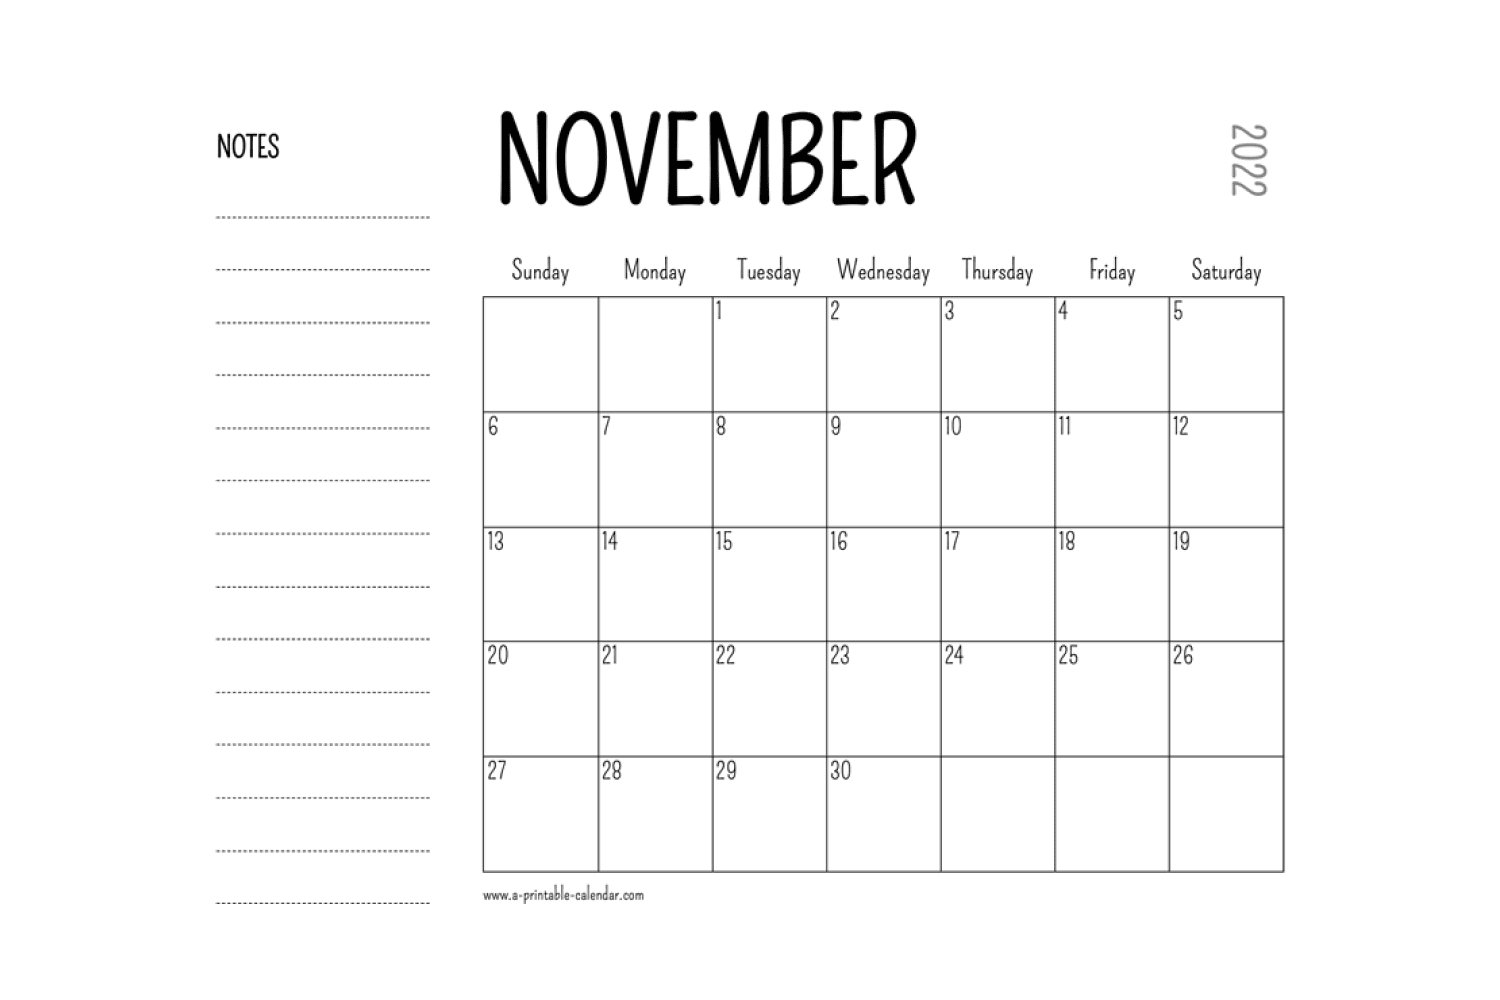 November calendar with black lines between dates and space for notes on the left.